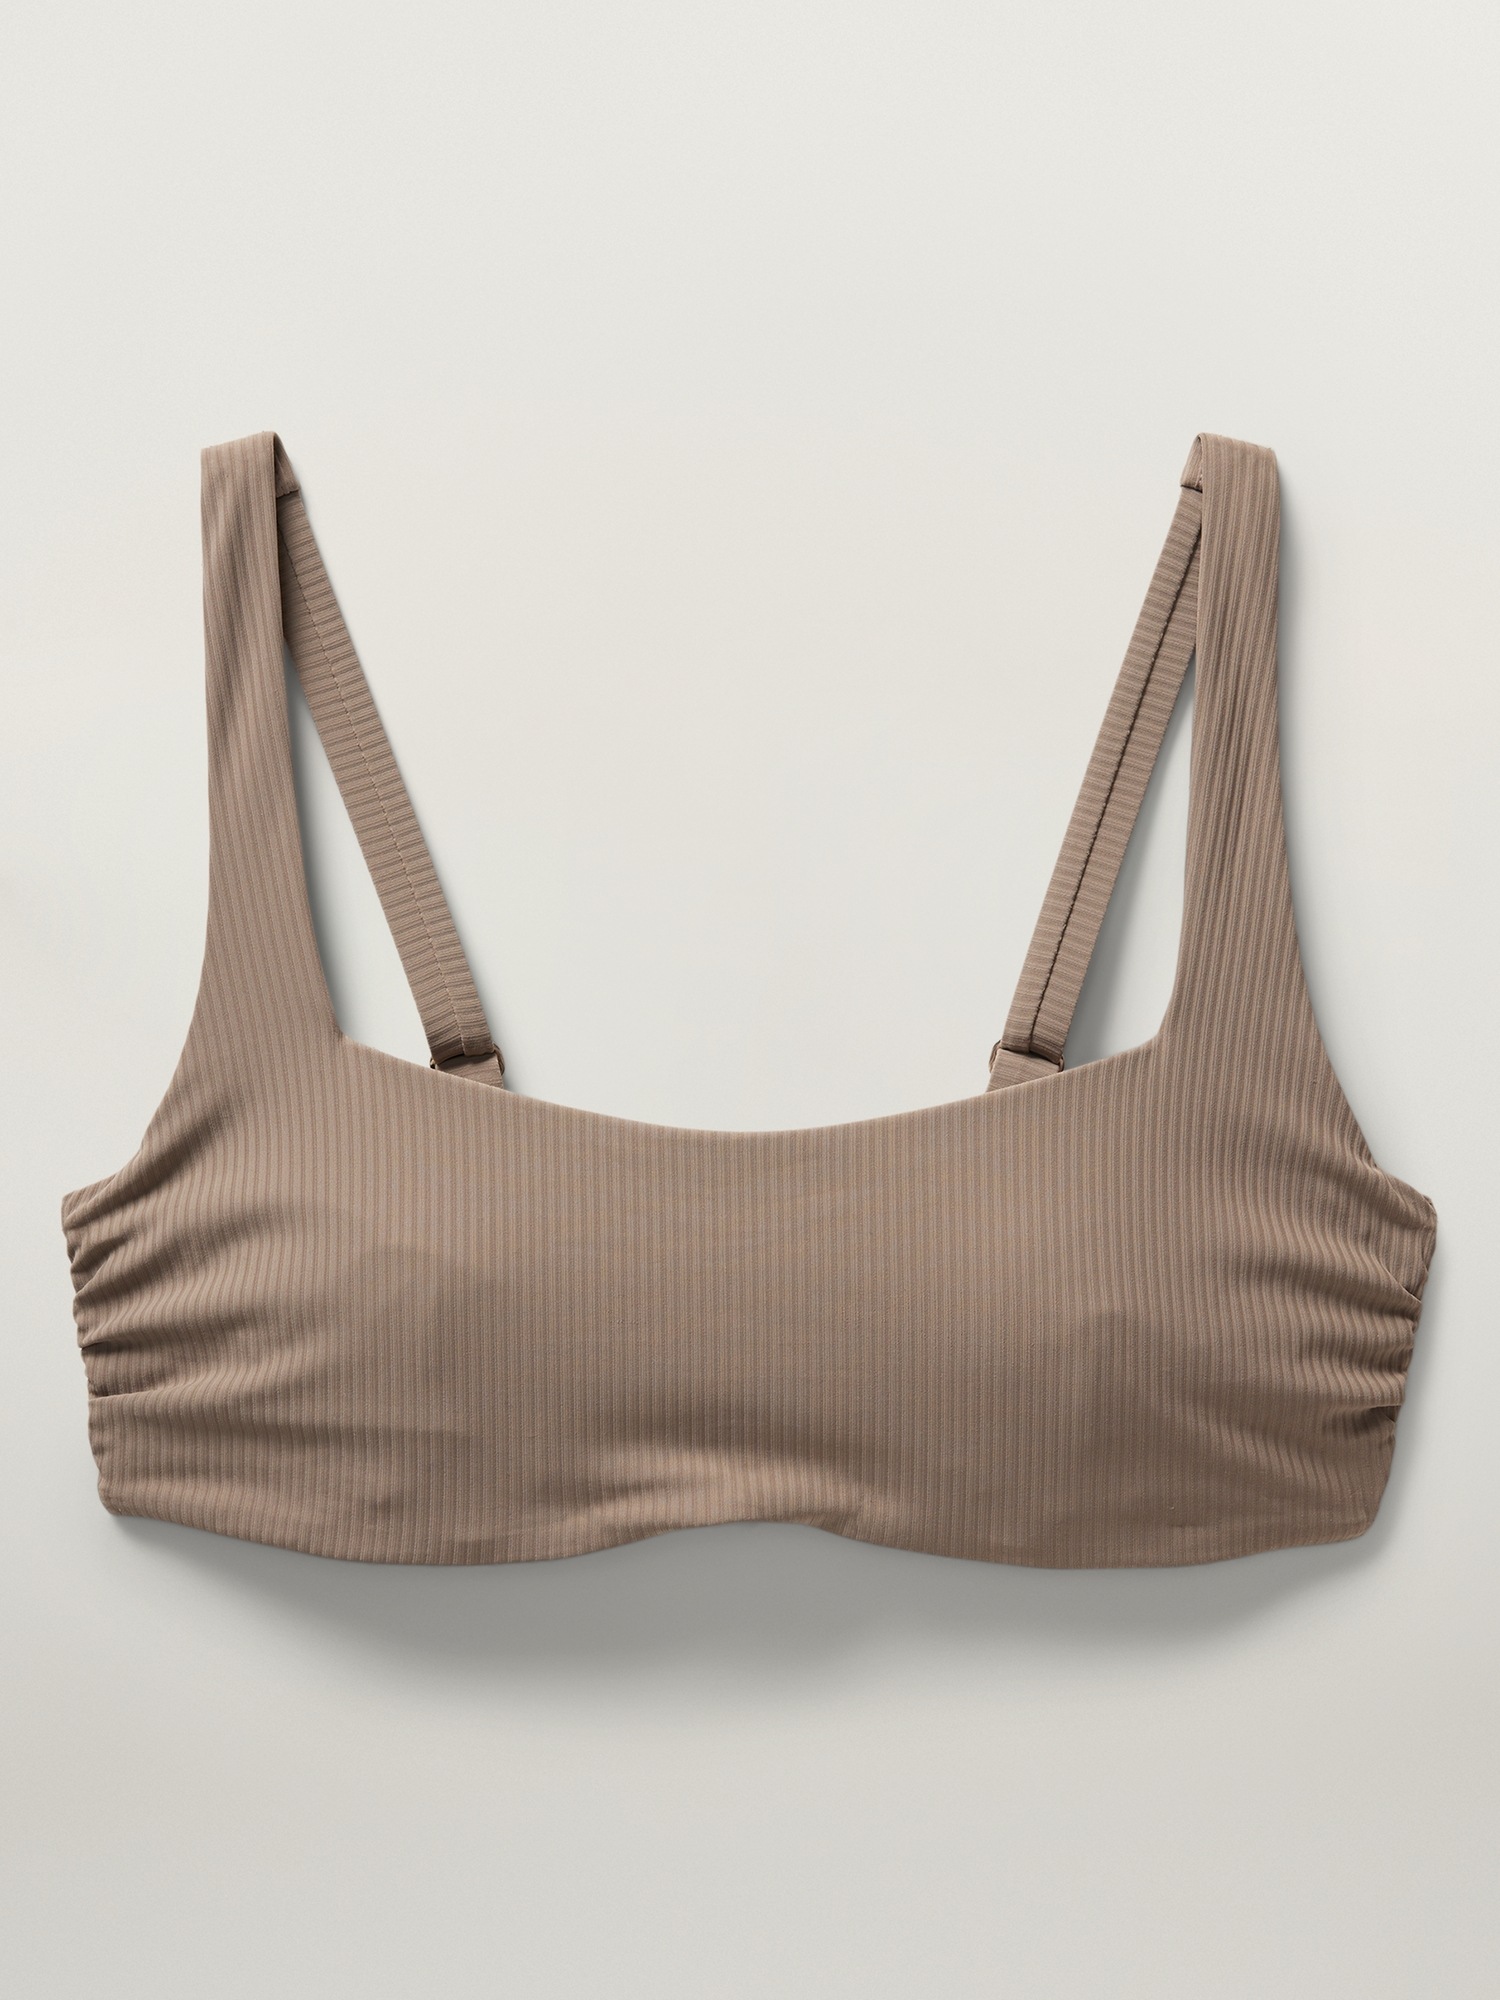 granny's bra, this tops normally tight on me . the bras an …